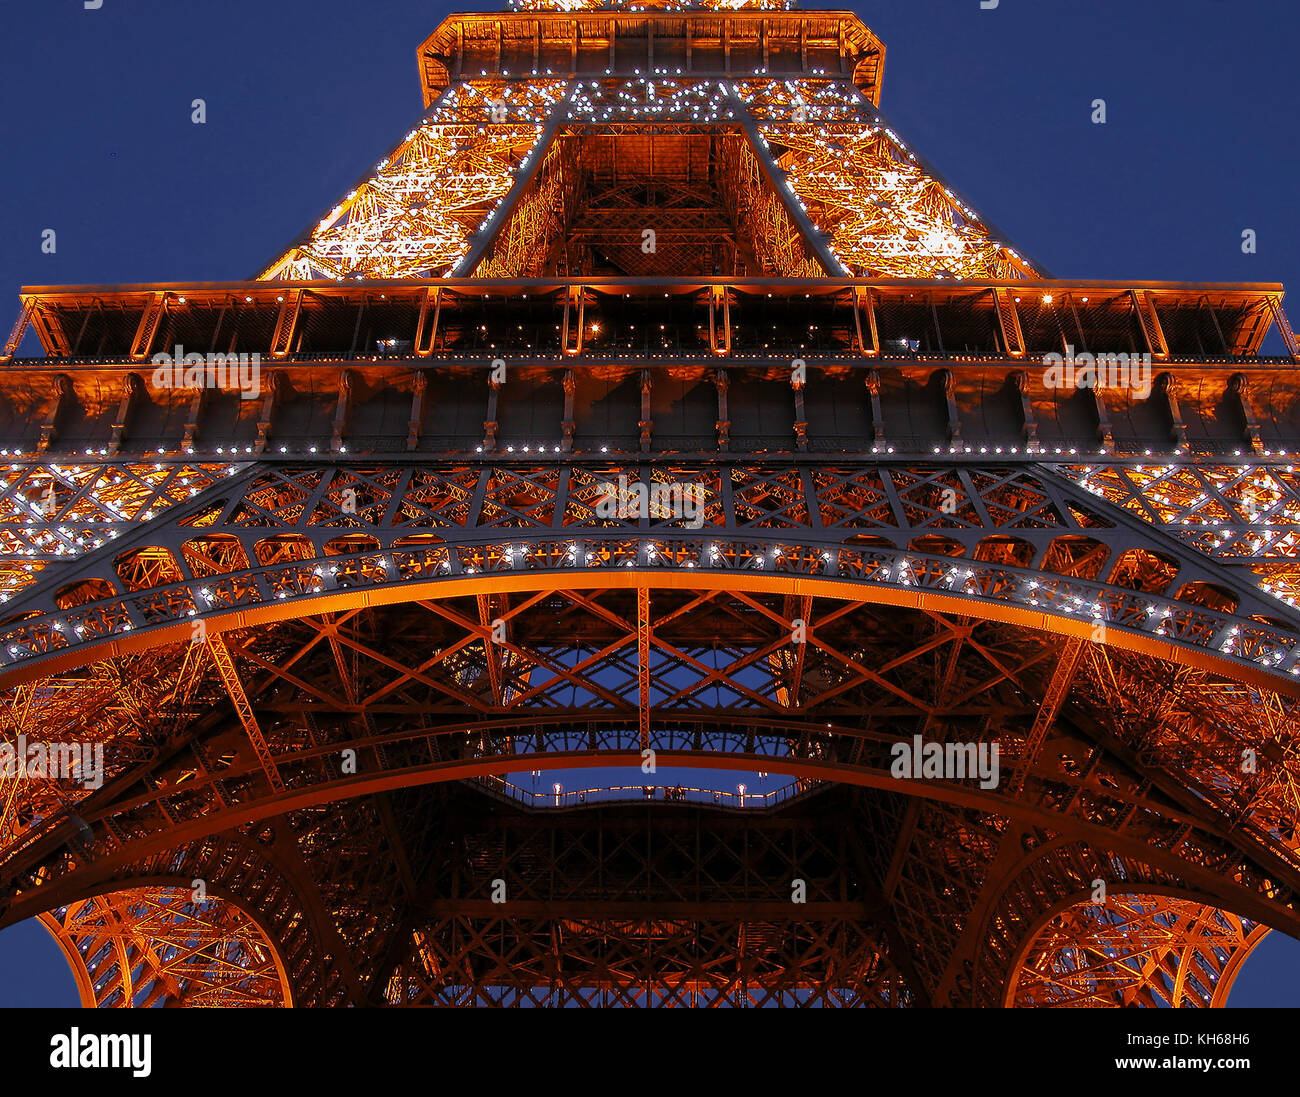 Eiffel Tower, Paris, France: detail of the first and second levels, illuminated at night Stock Photo